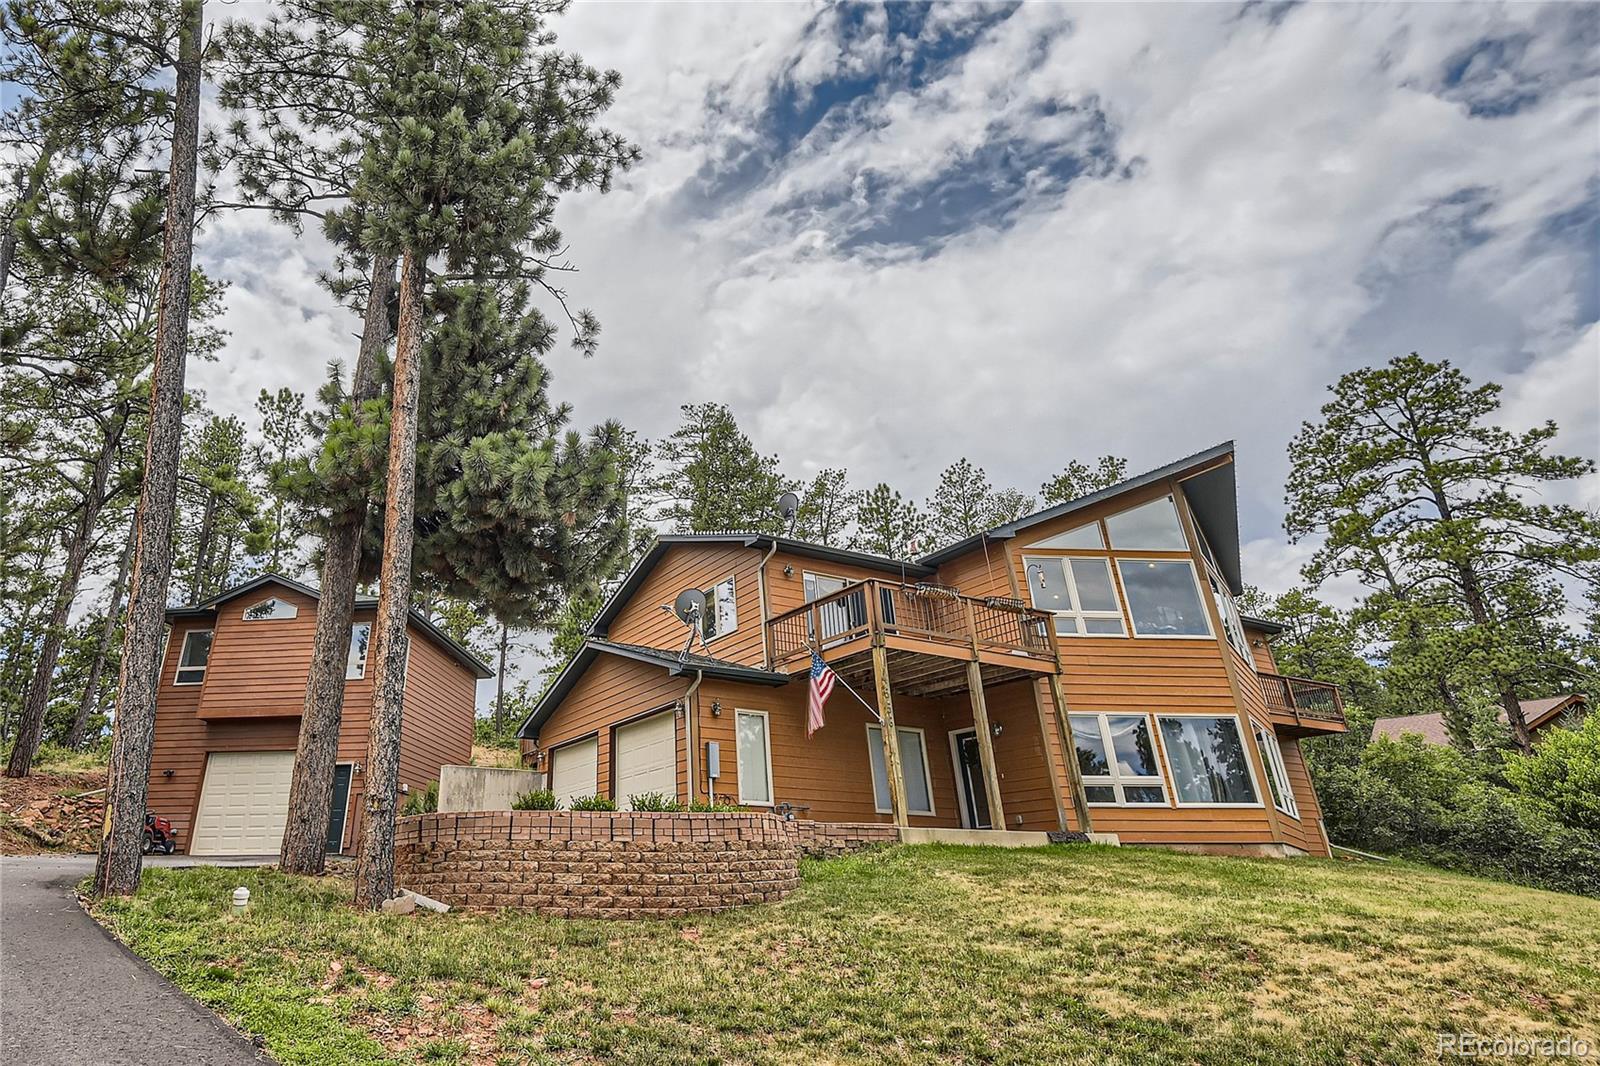 4556  shoshone drive, Larkspur sold home. Closed on 2024-02-23 for $865,000.